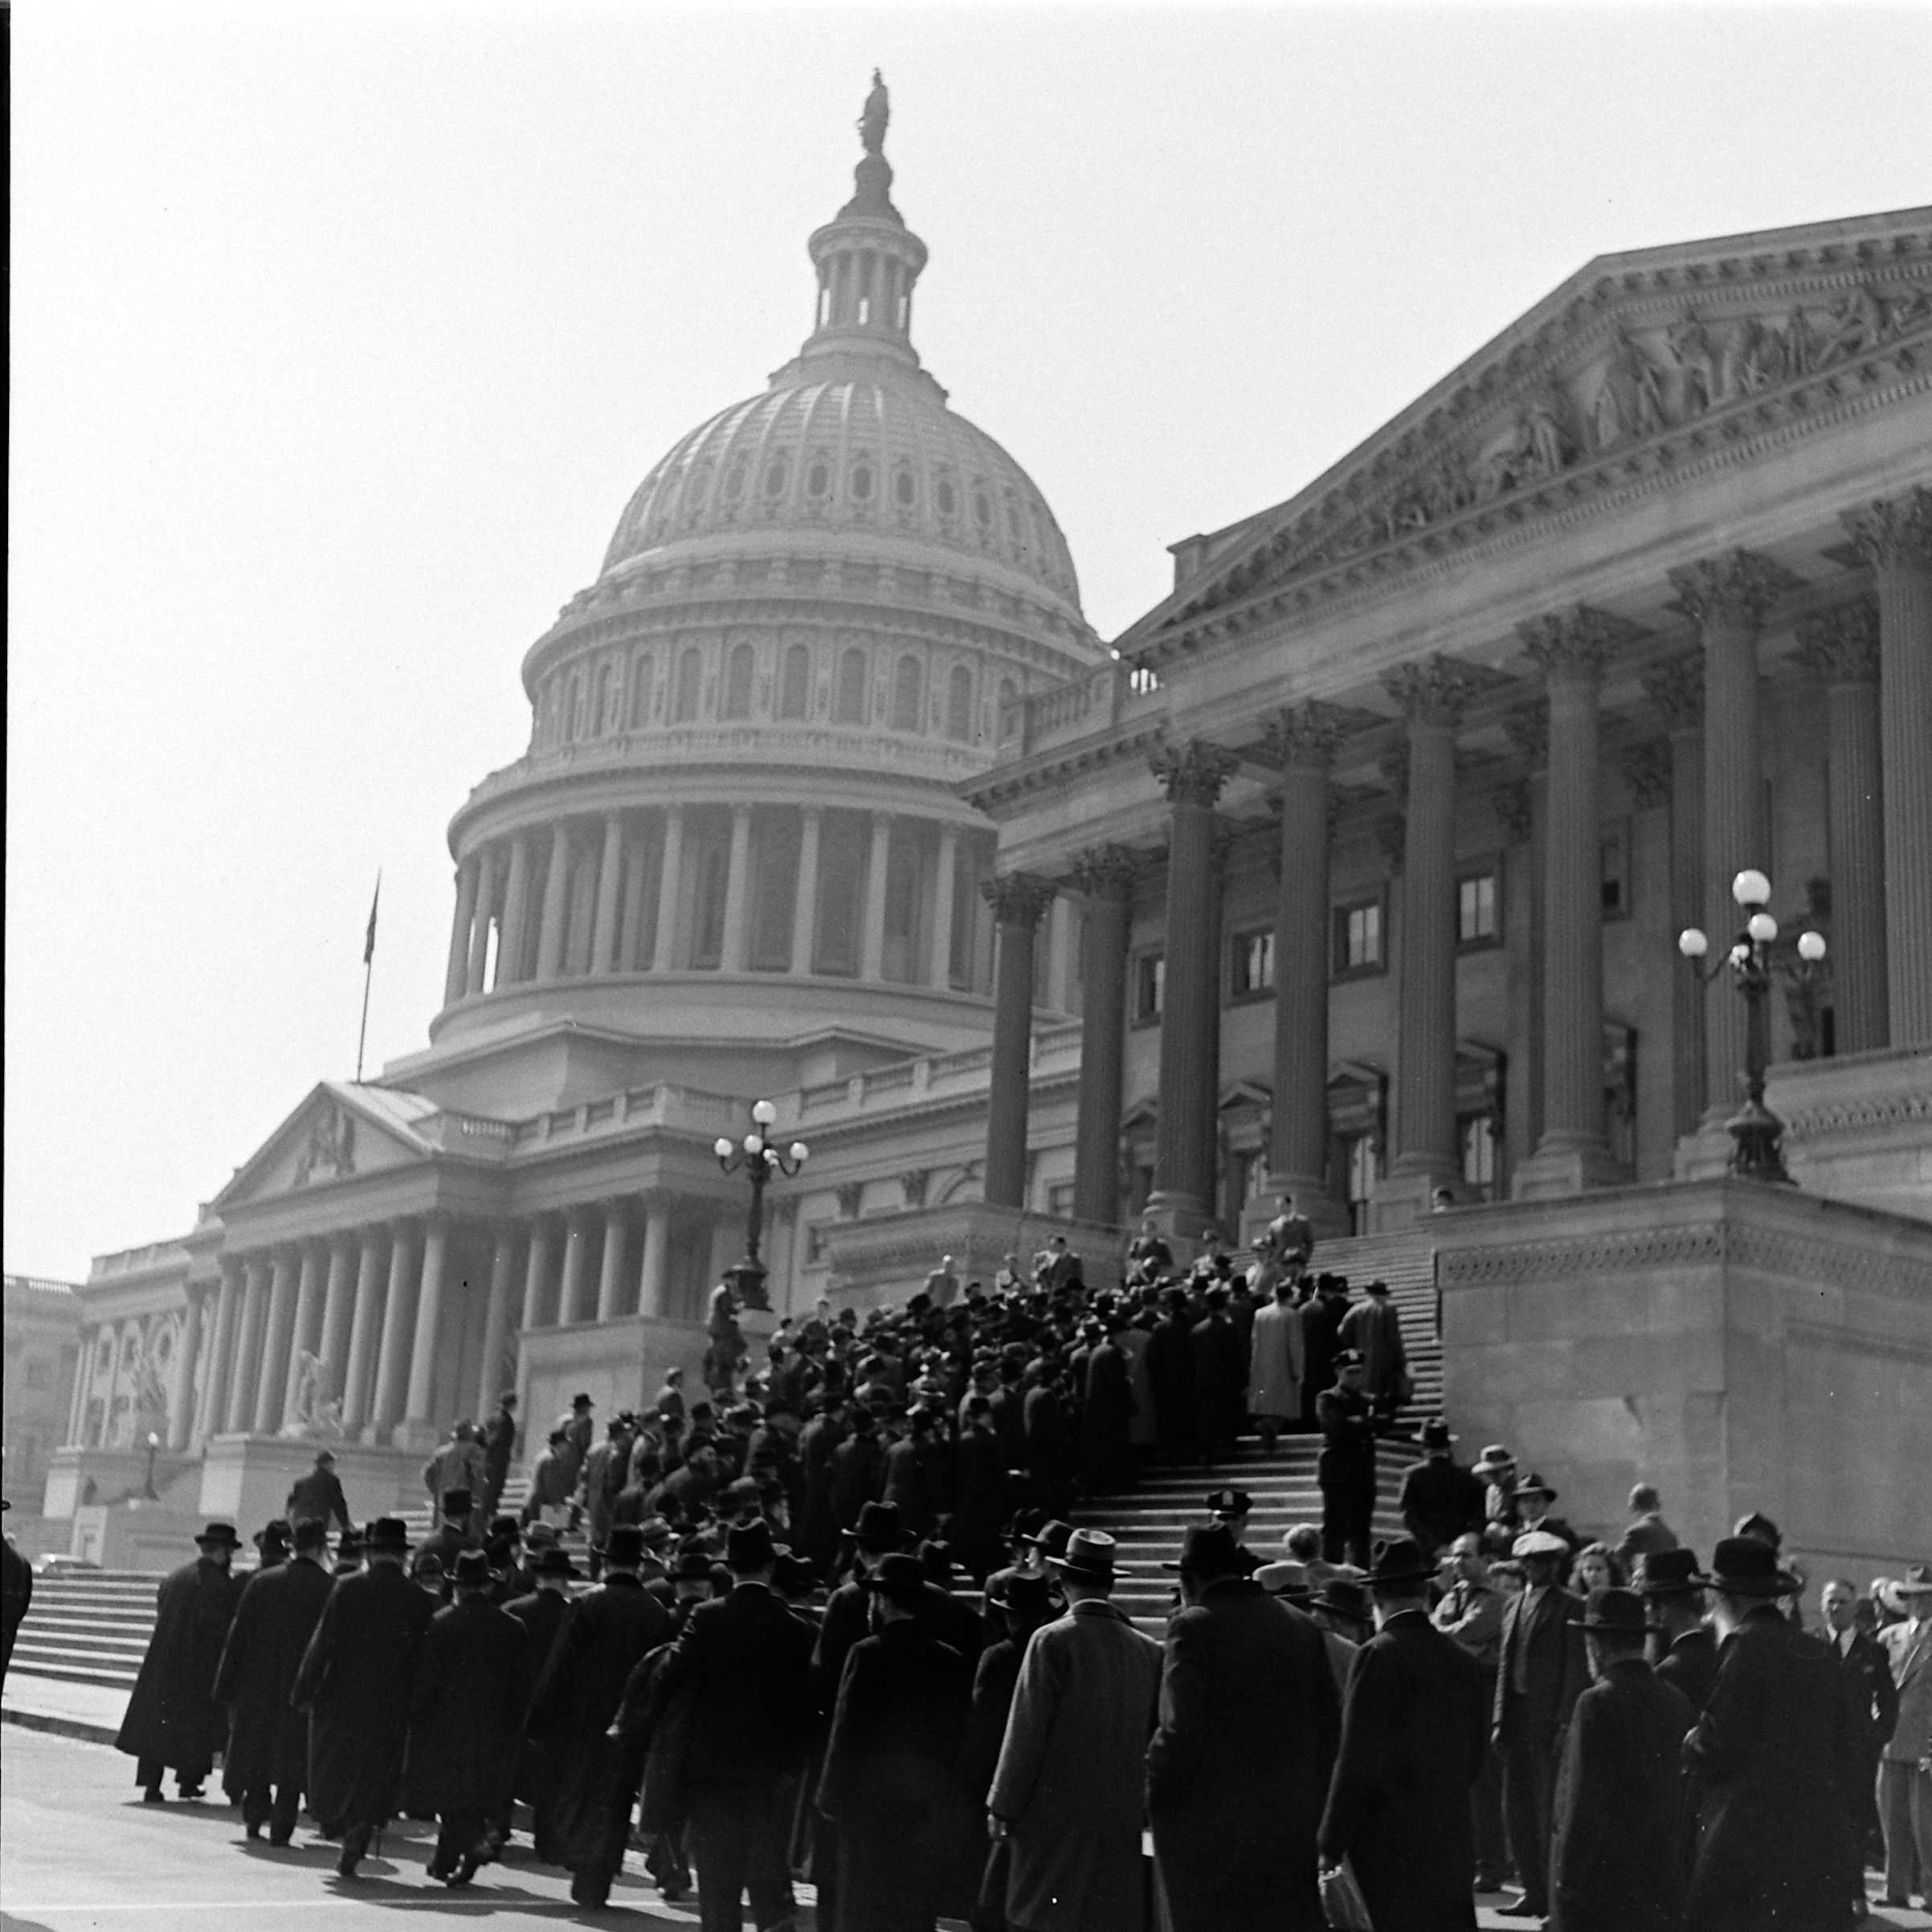 Participants in the Rabbis' March on the steps of the United States Capitol Building in Washington, D.C., on Oct. 6, 1943. (Thomas McAvoy—The LIFE Picture Collection/Getty Images)